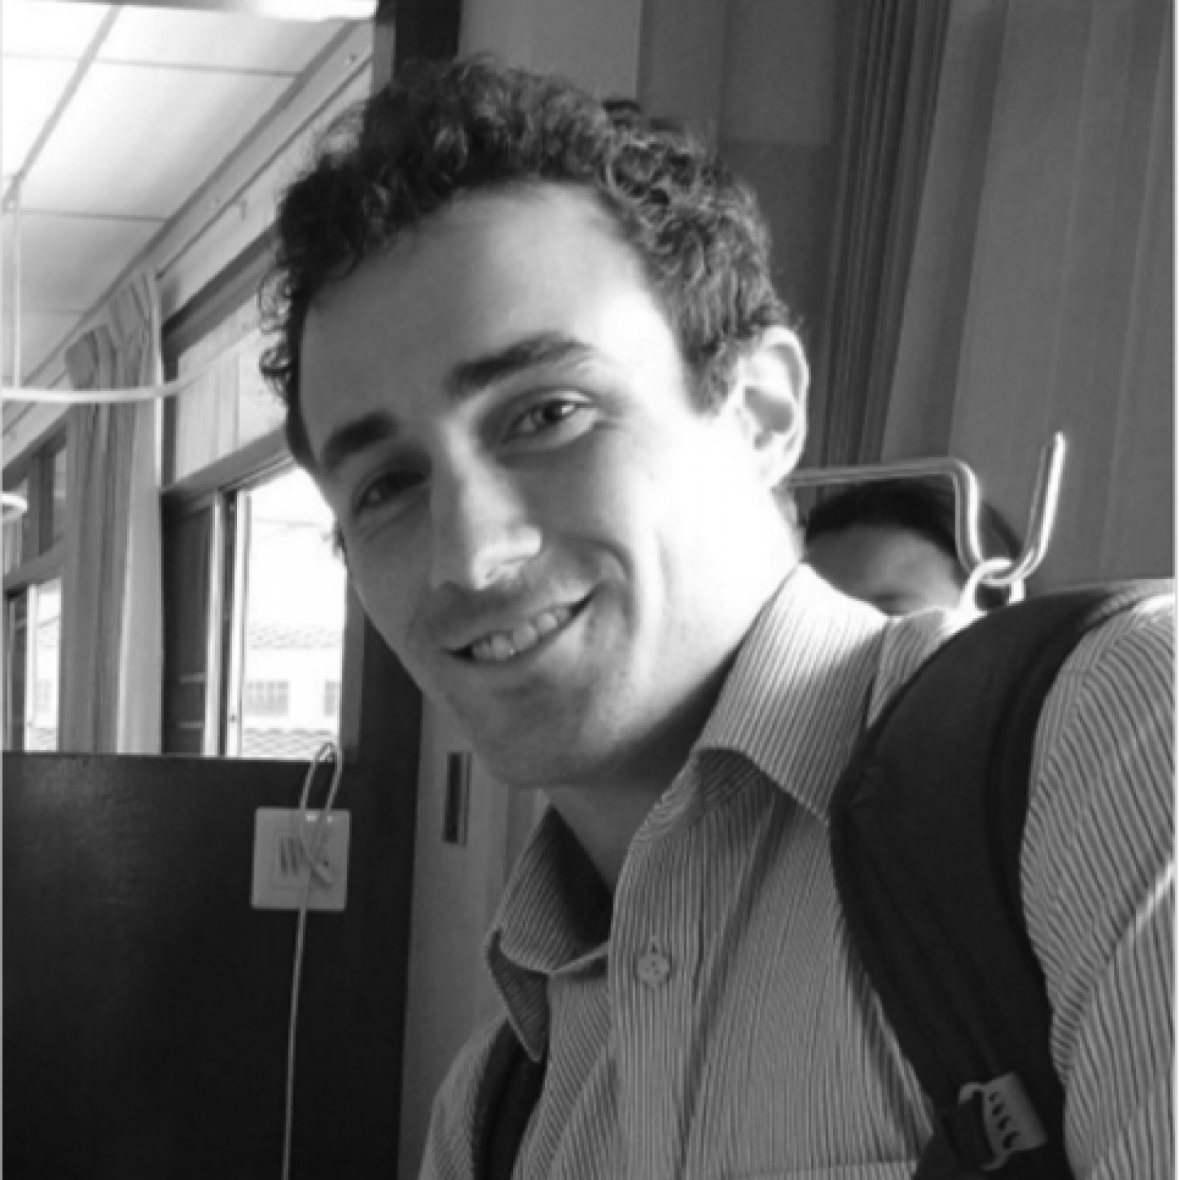 Watson Fellow smiles at camera, wearing a button-down shirt and backpack, in black and white